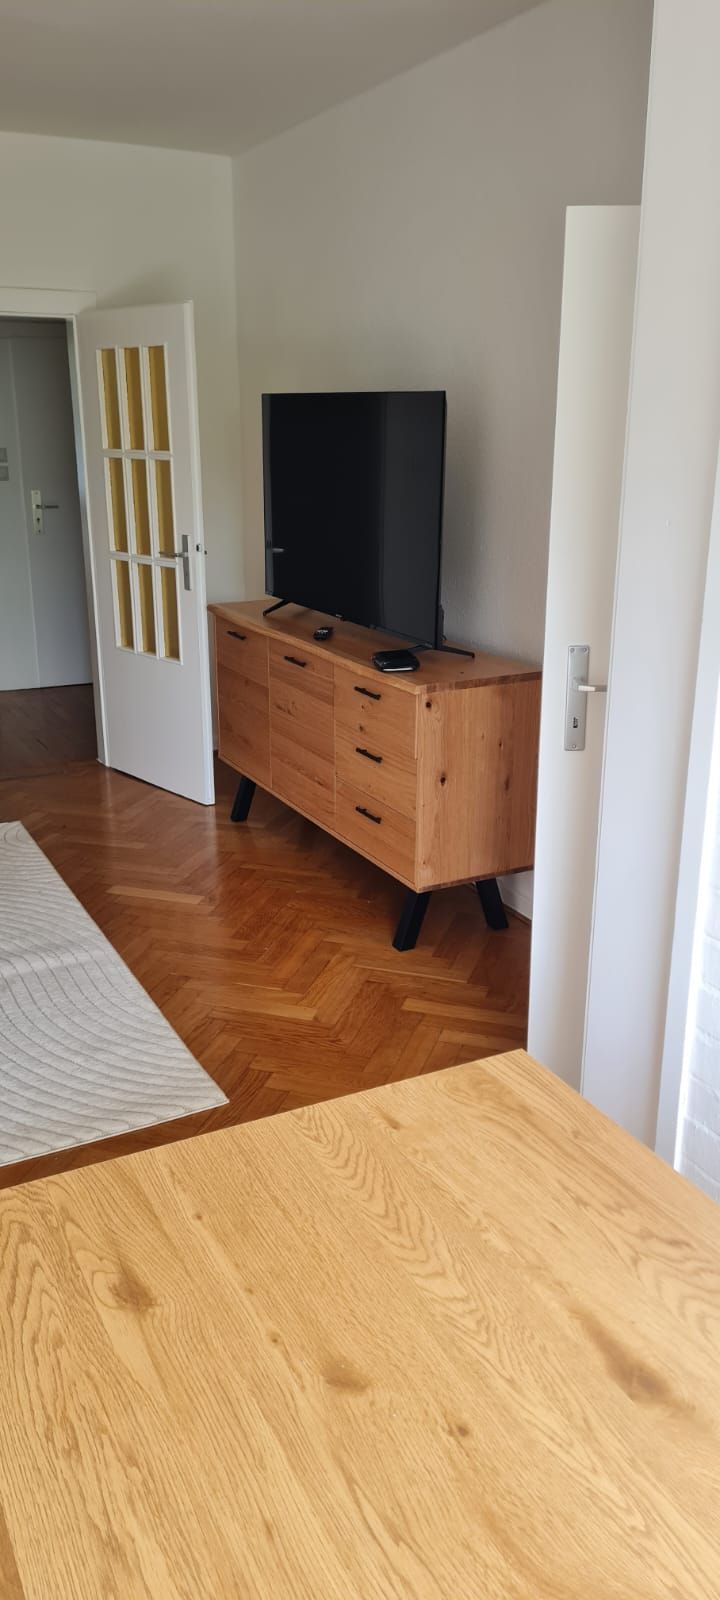 Awesome and fantastic studio located in Düsseldorf